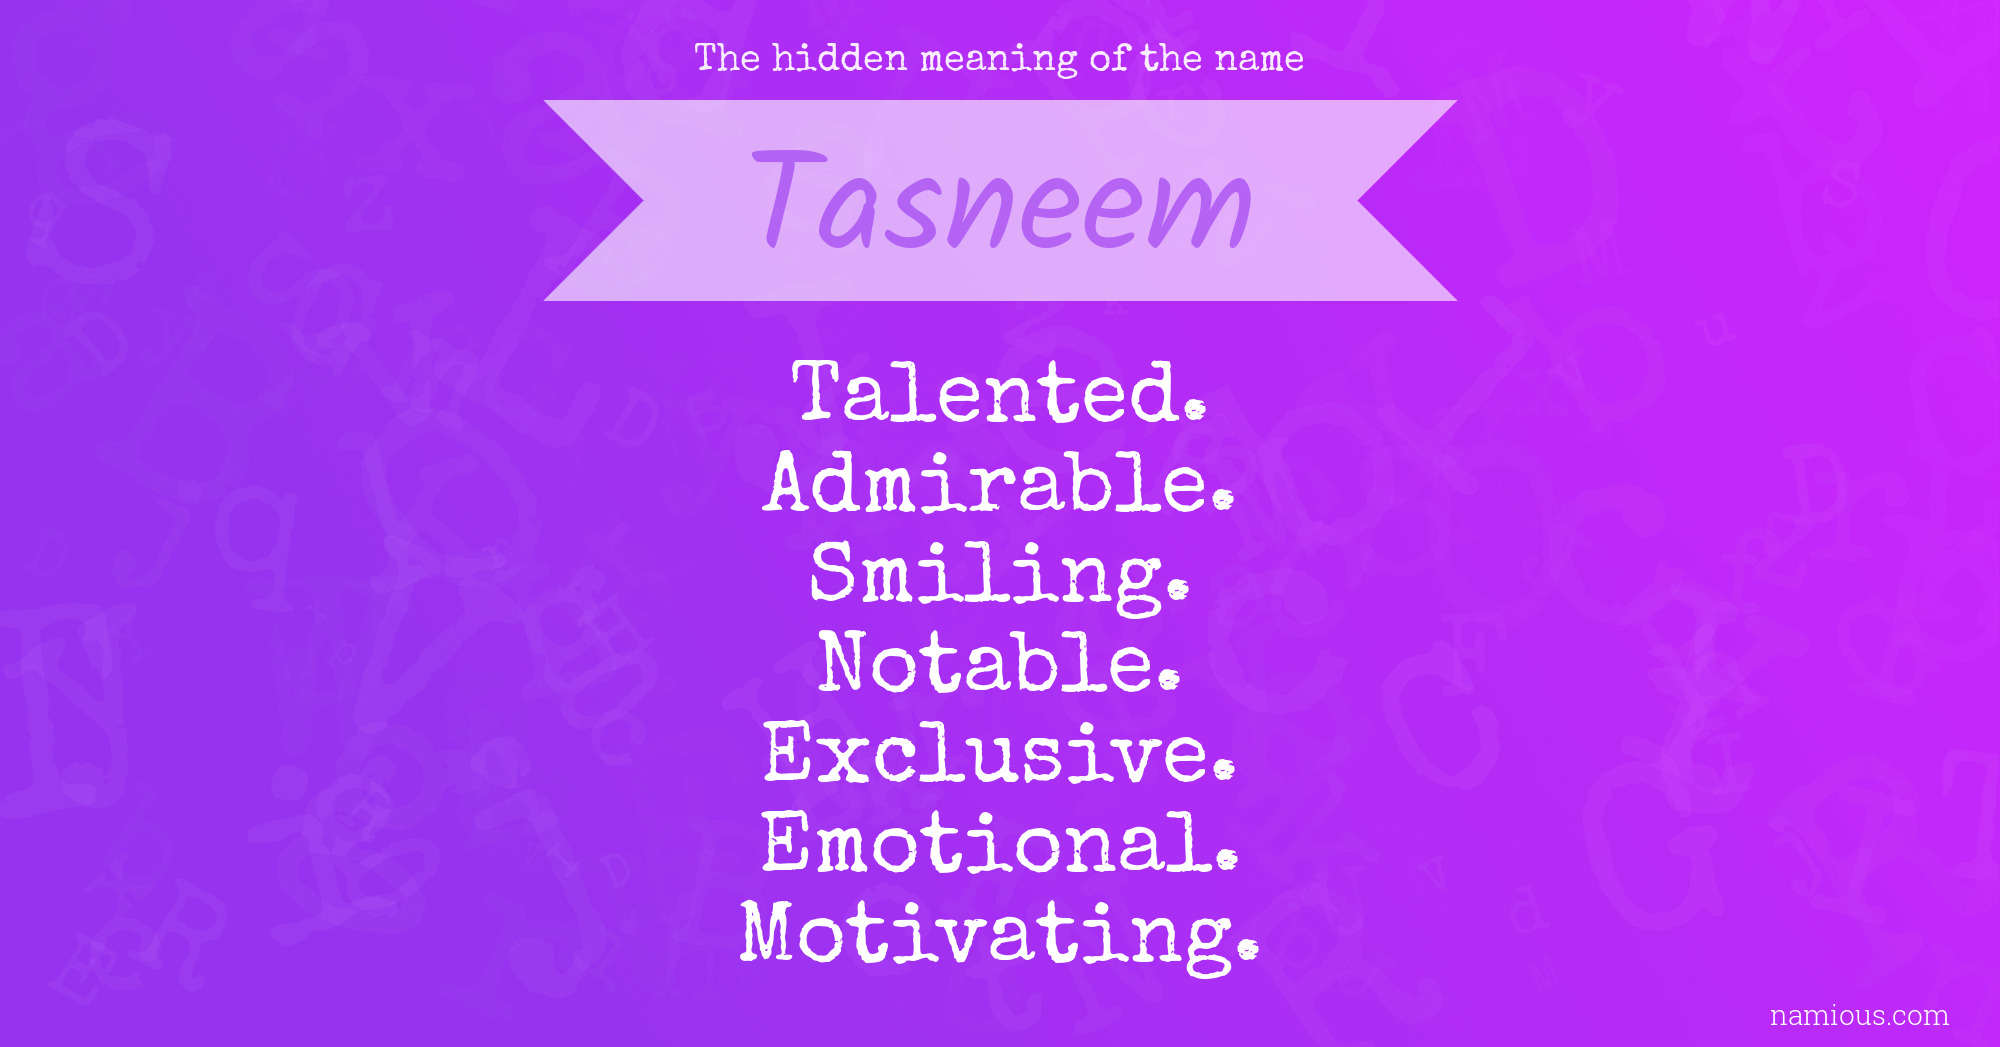 The hidden meaning of the name Tasneem